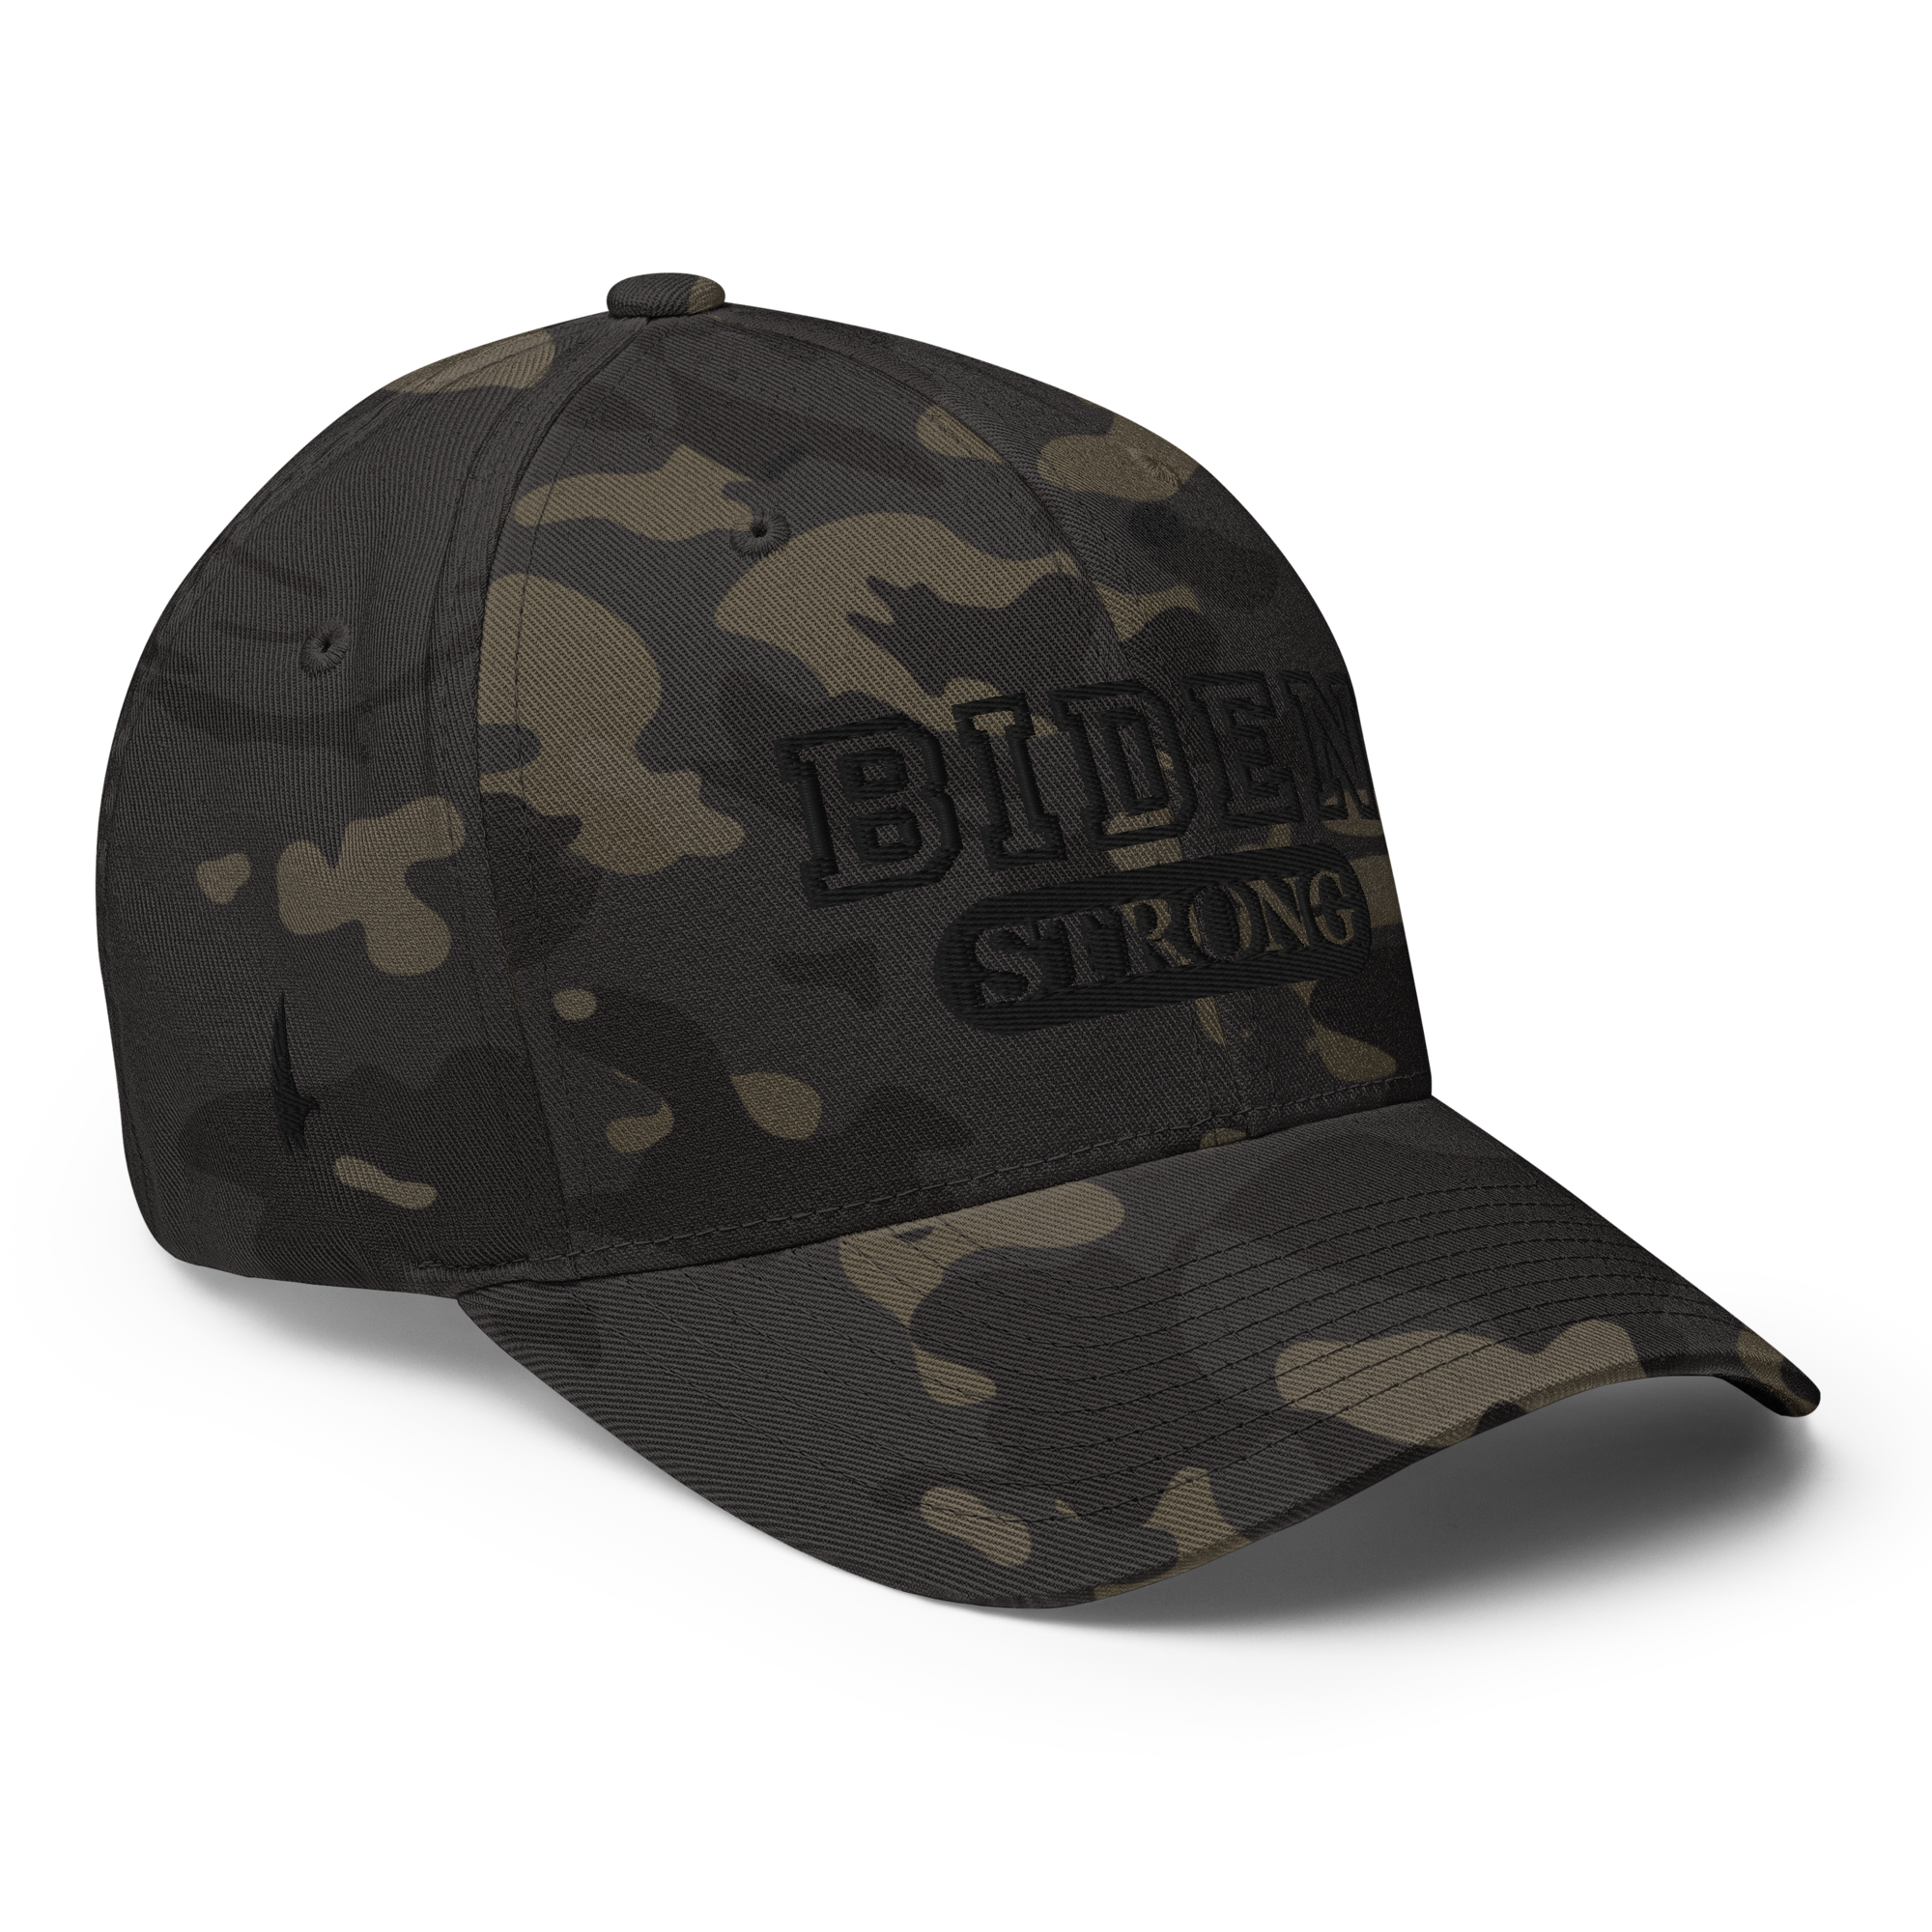 Biden Strong Fitted Hat Urban Camo Black Fitted - Loyalty Vibes